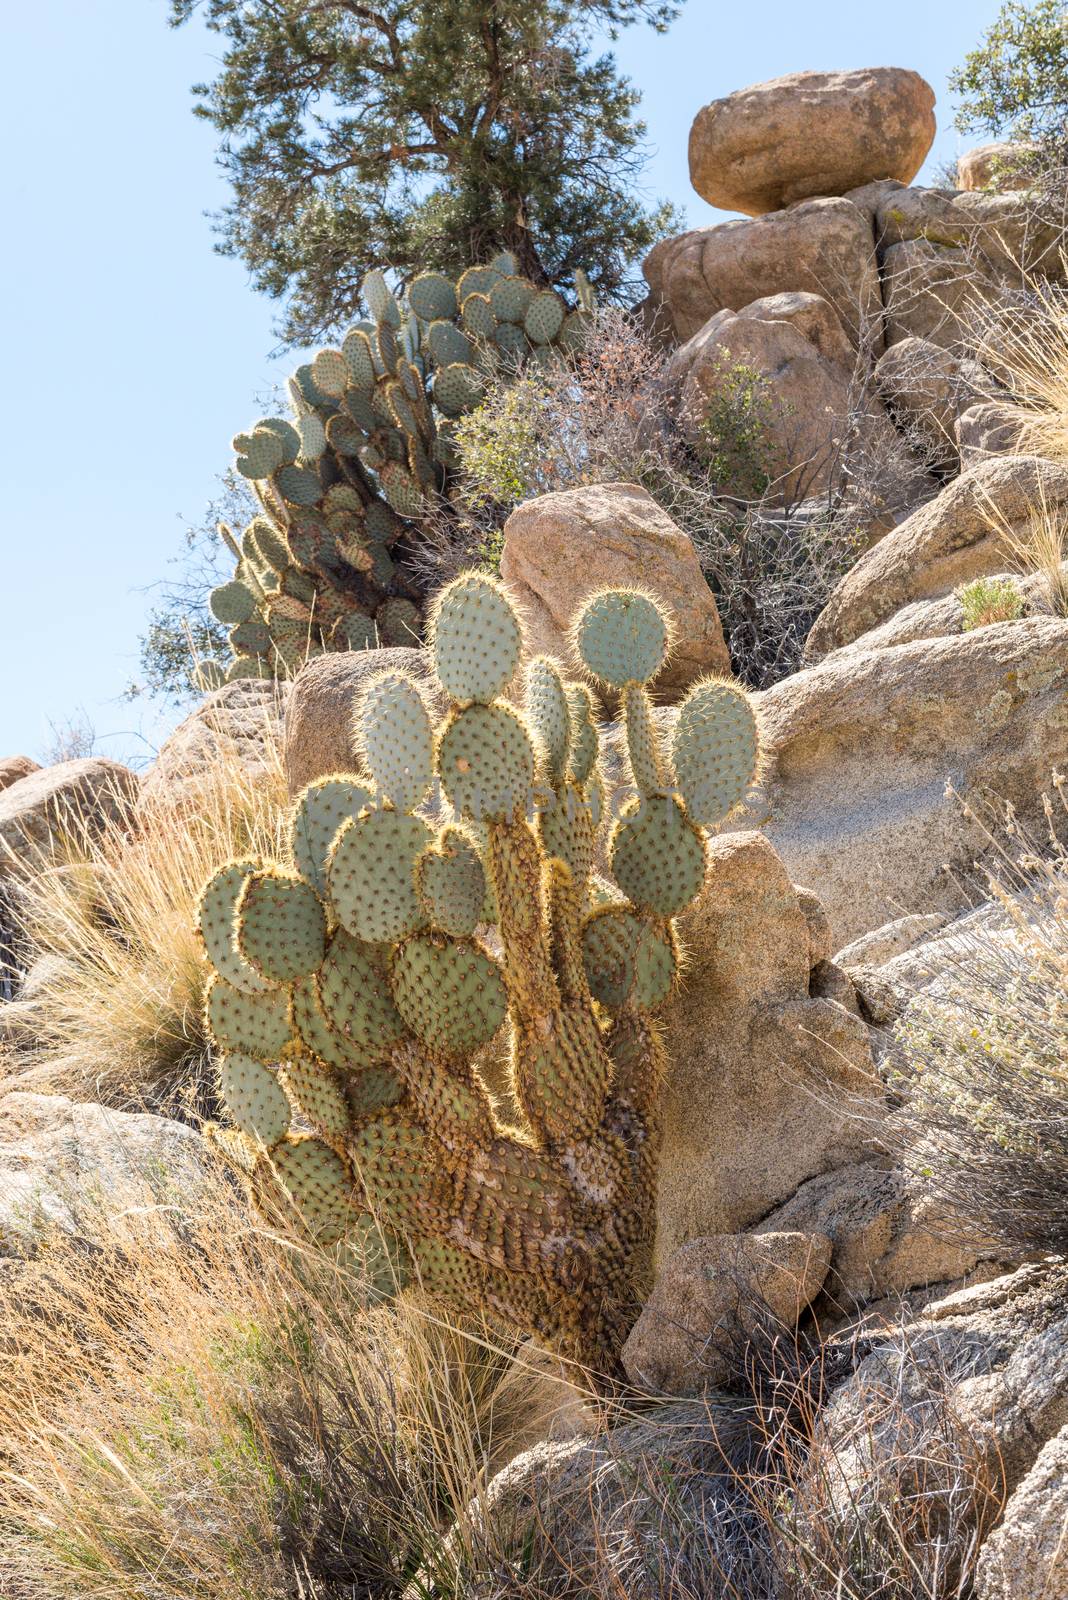 Opuntia chlorotica (dollarjoint pricklypear) cactus along Willow by Njean